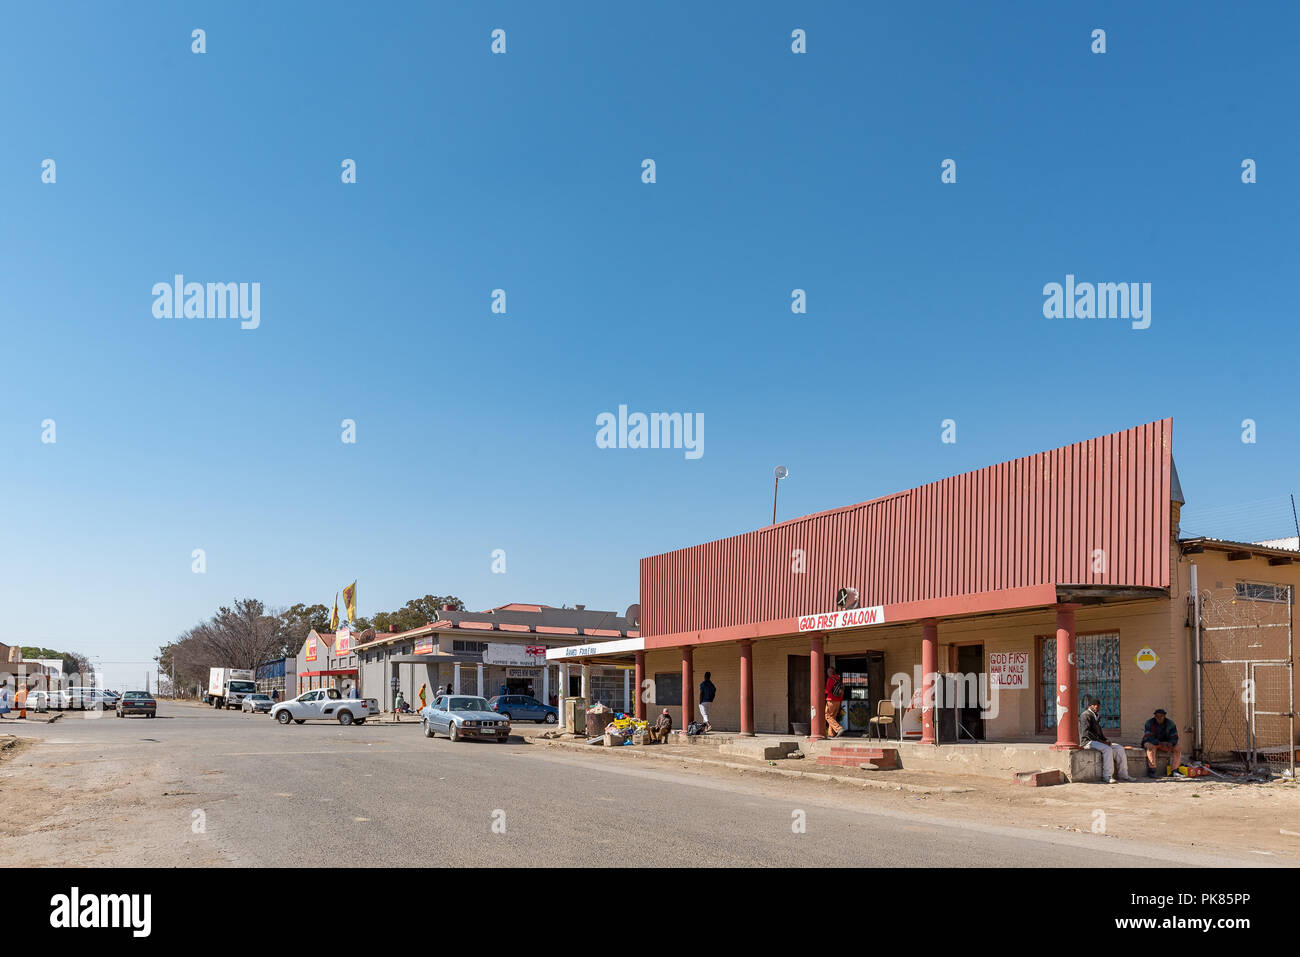 KOPPIES, SOUTH AFRICA, JULY 30, 2018: A street scene, with businesses, people and vehicles, in Koppies, a town in the Free State Province of South Afr Stock Photo